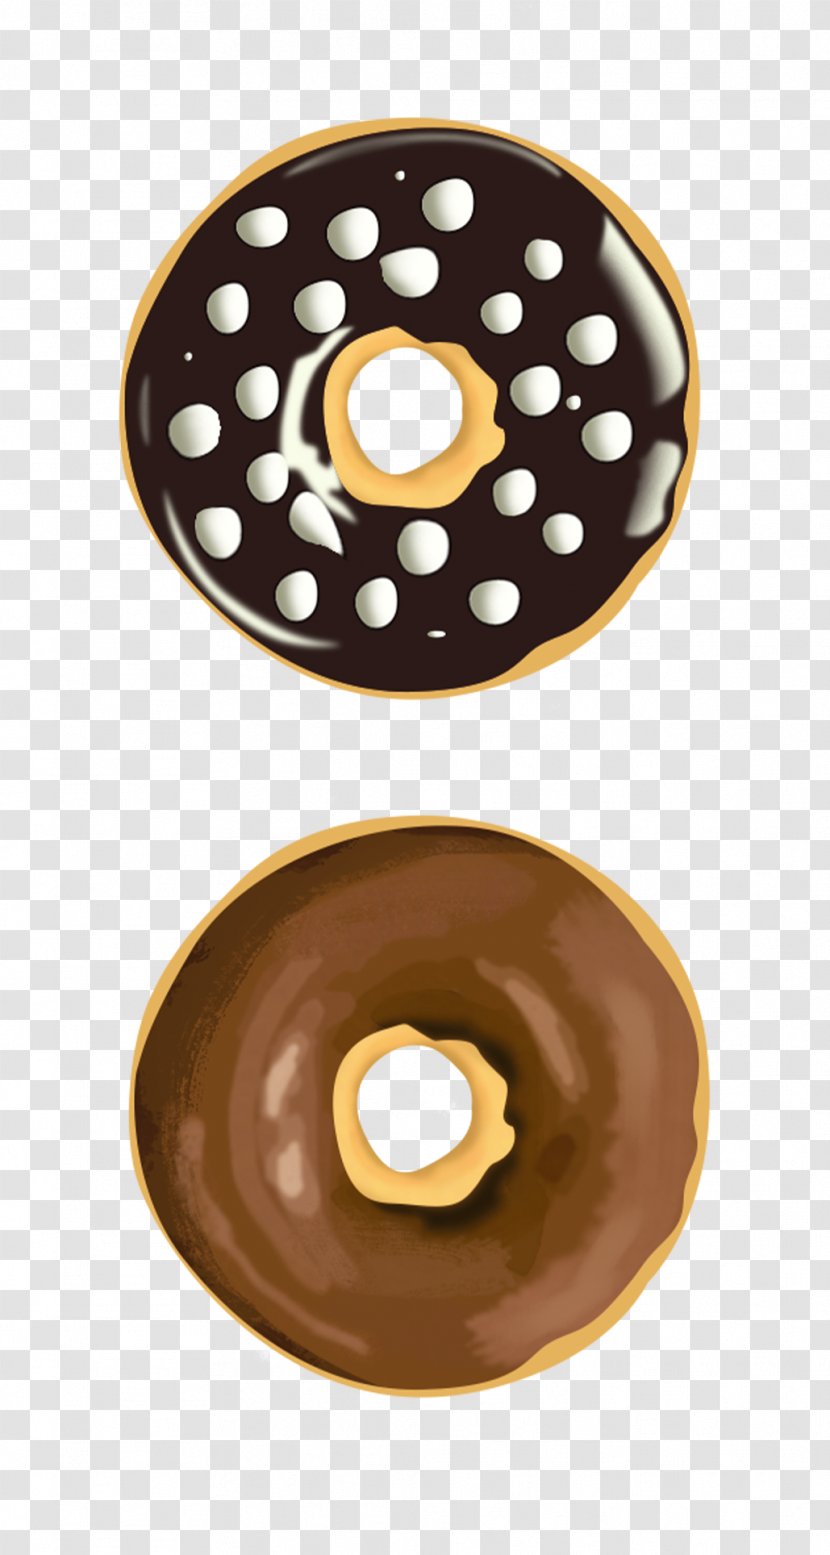 Donuts Chocolate Cake - Snack Transparent PNG